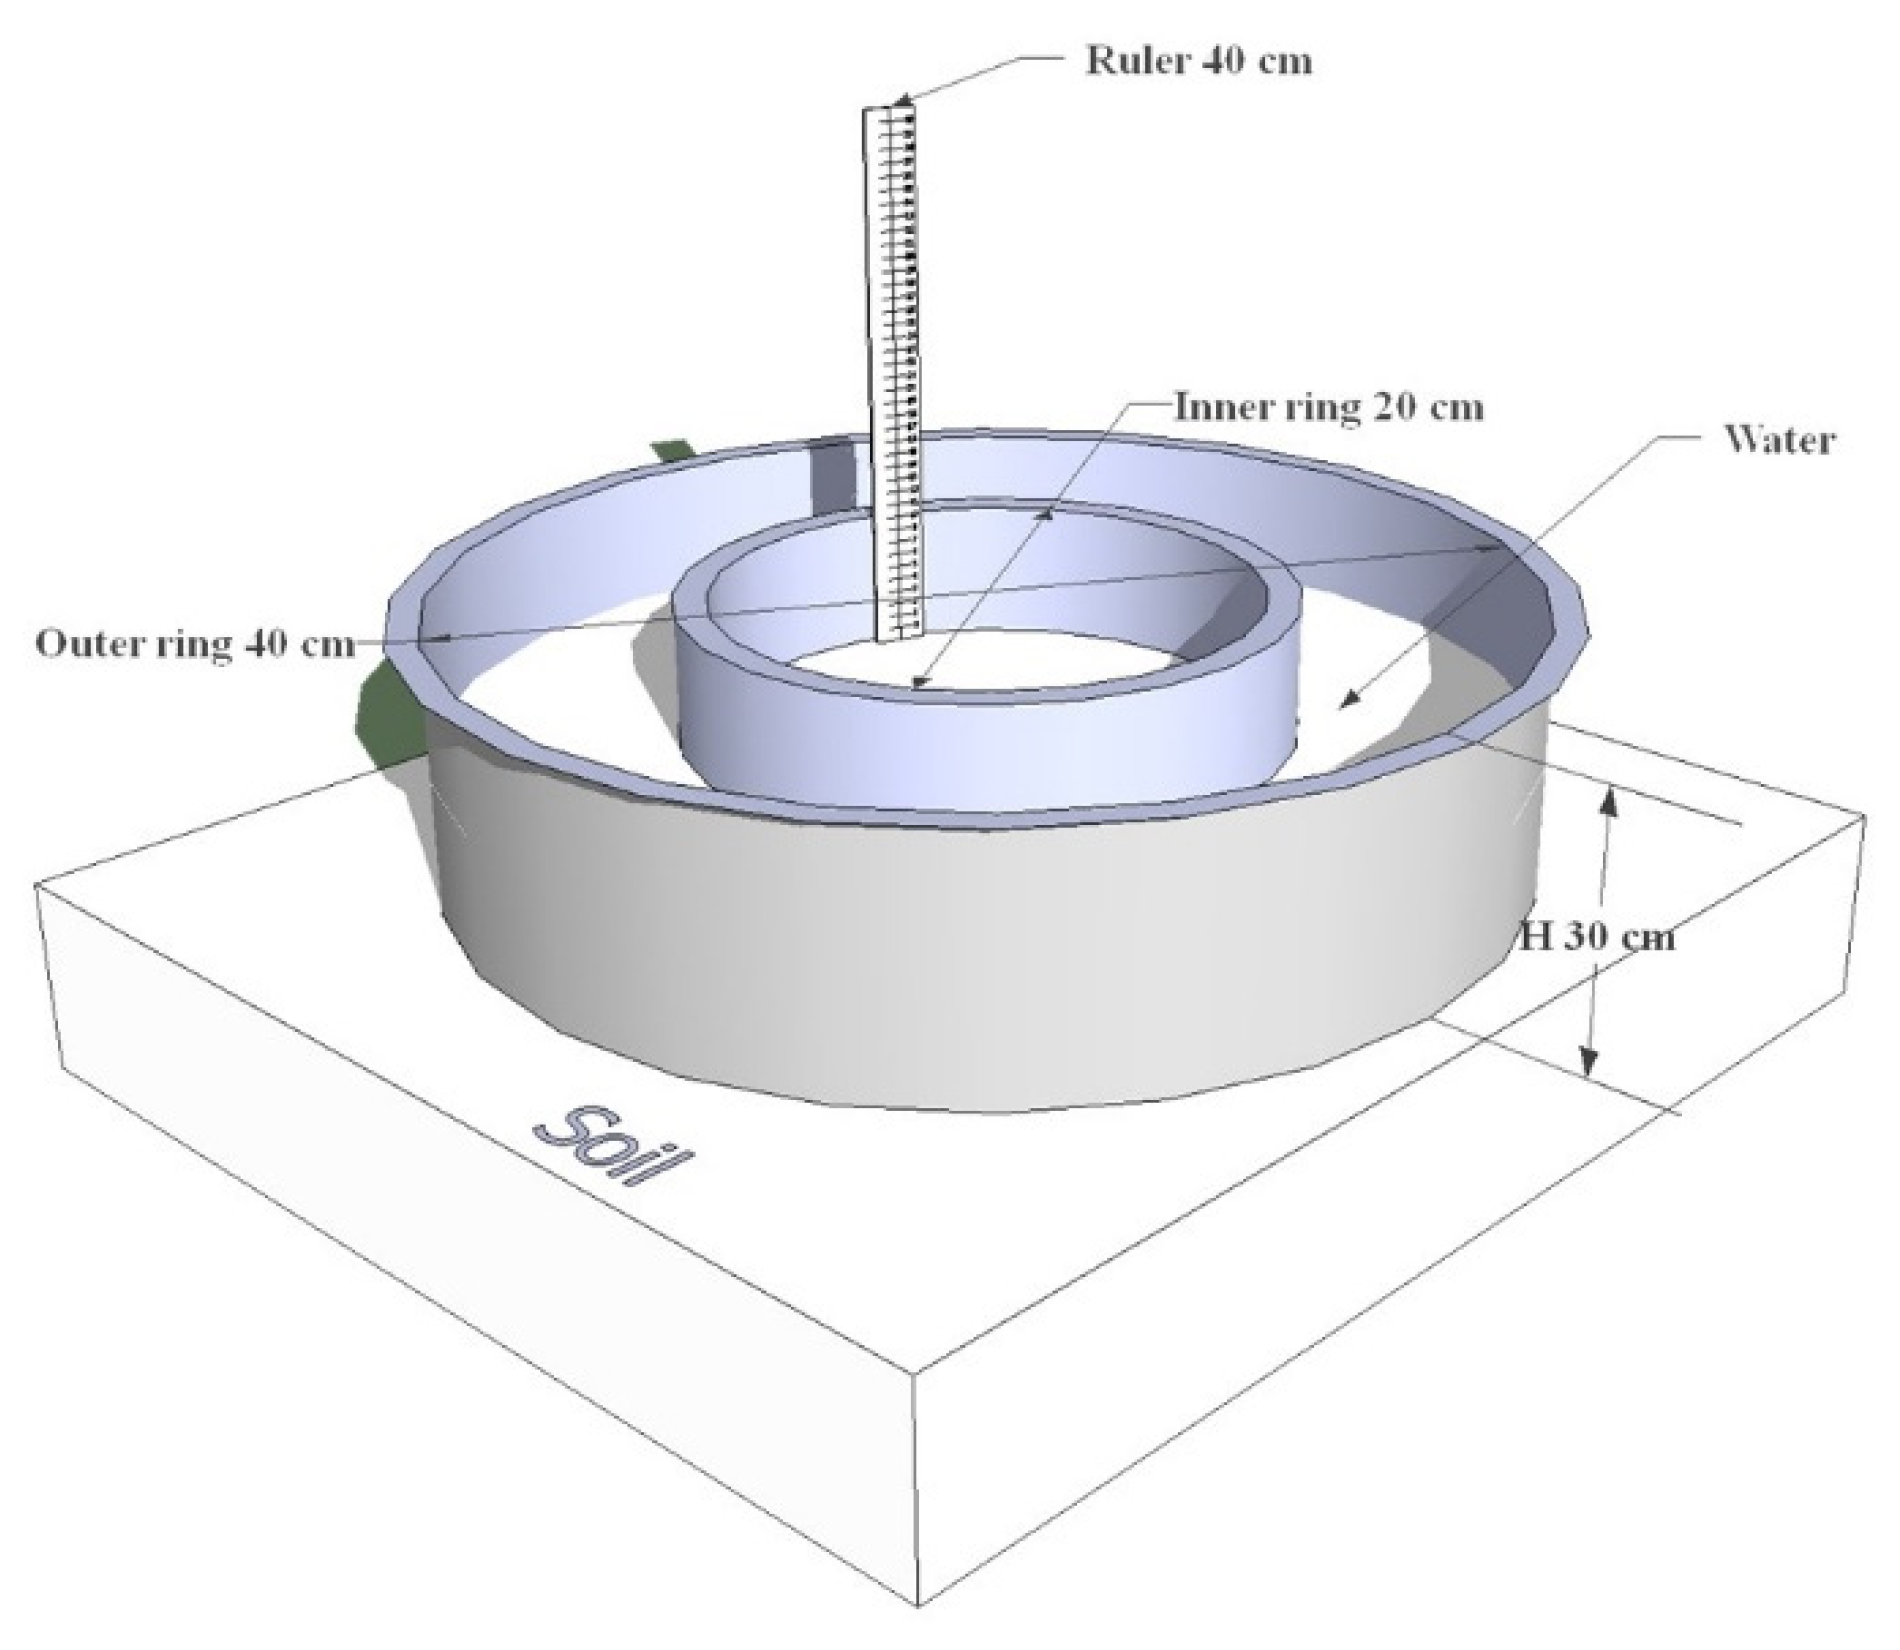 Double ring infiltrometers - LID SWM Planning and Design Guide